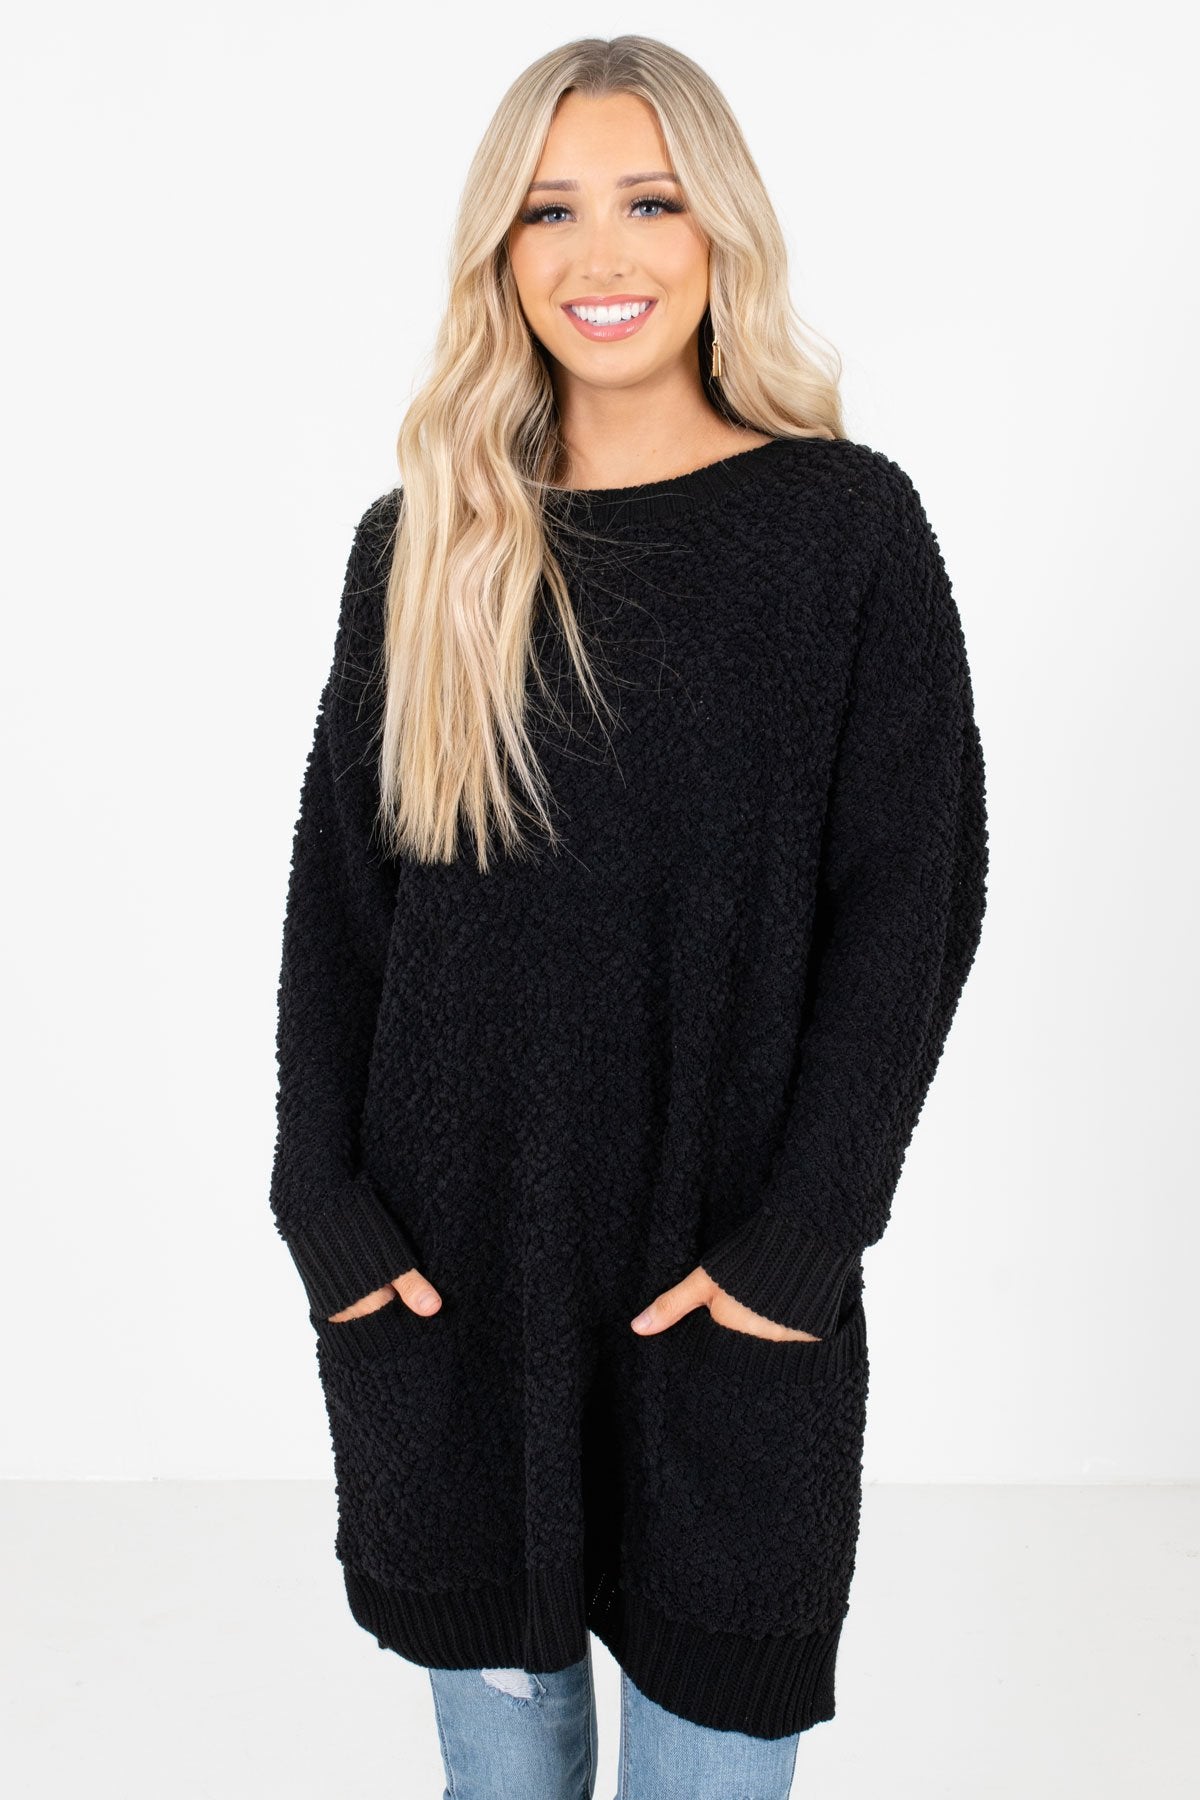 Black High-Quality Popcorn Knit Material Boutique Sweaters for Women